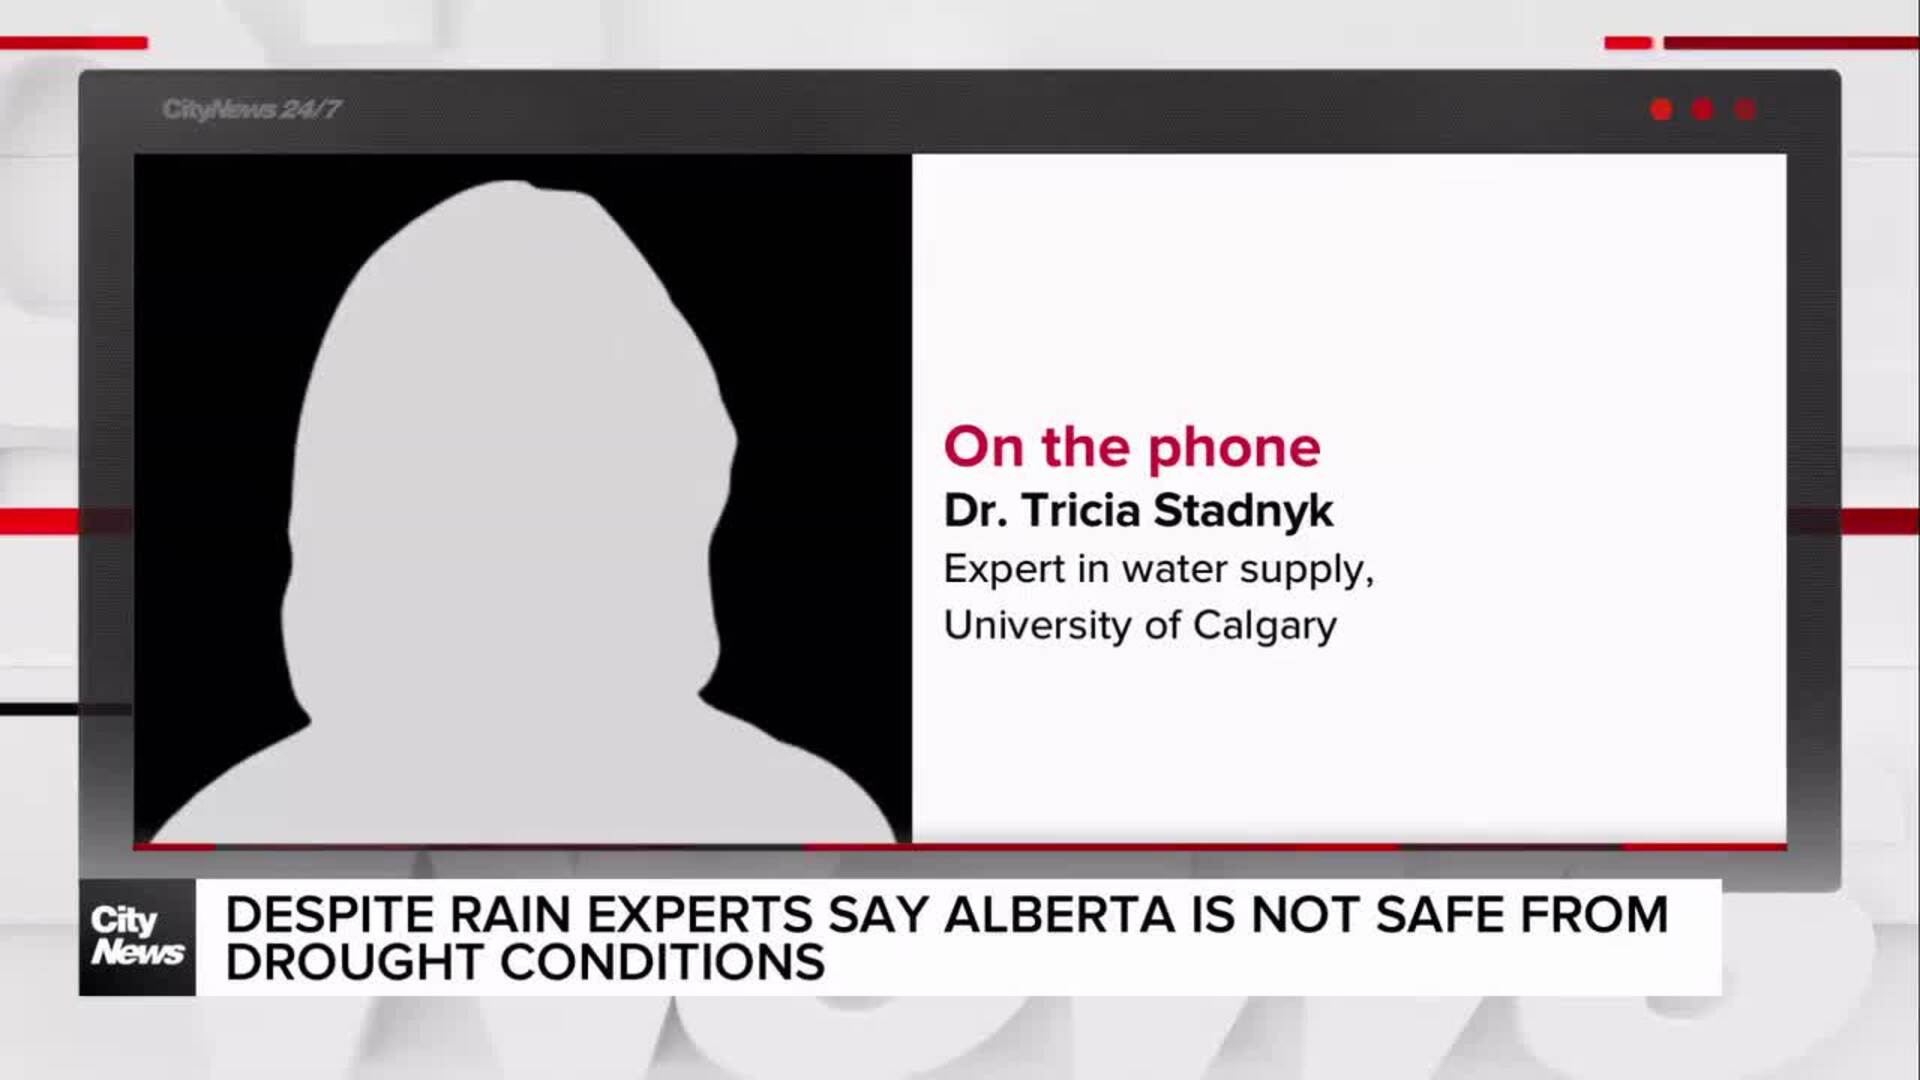 Despite rain experts say Alberta is not safe from drought conditions